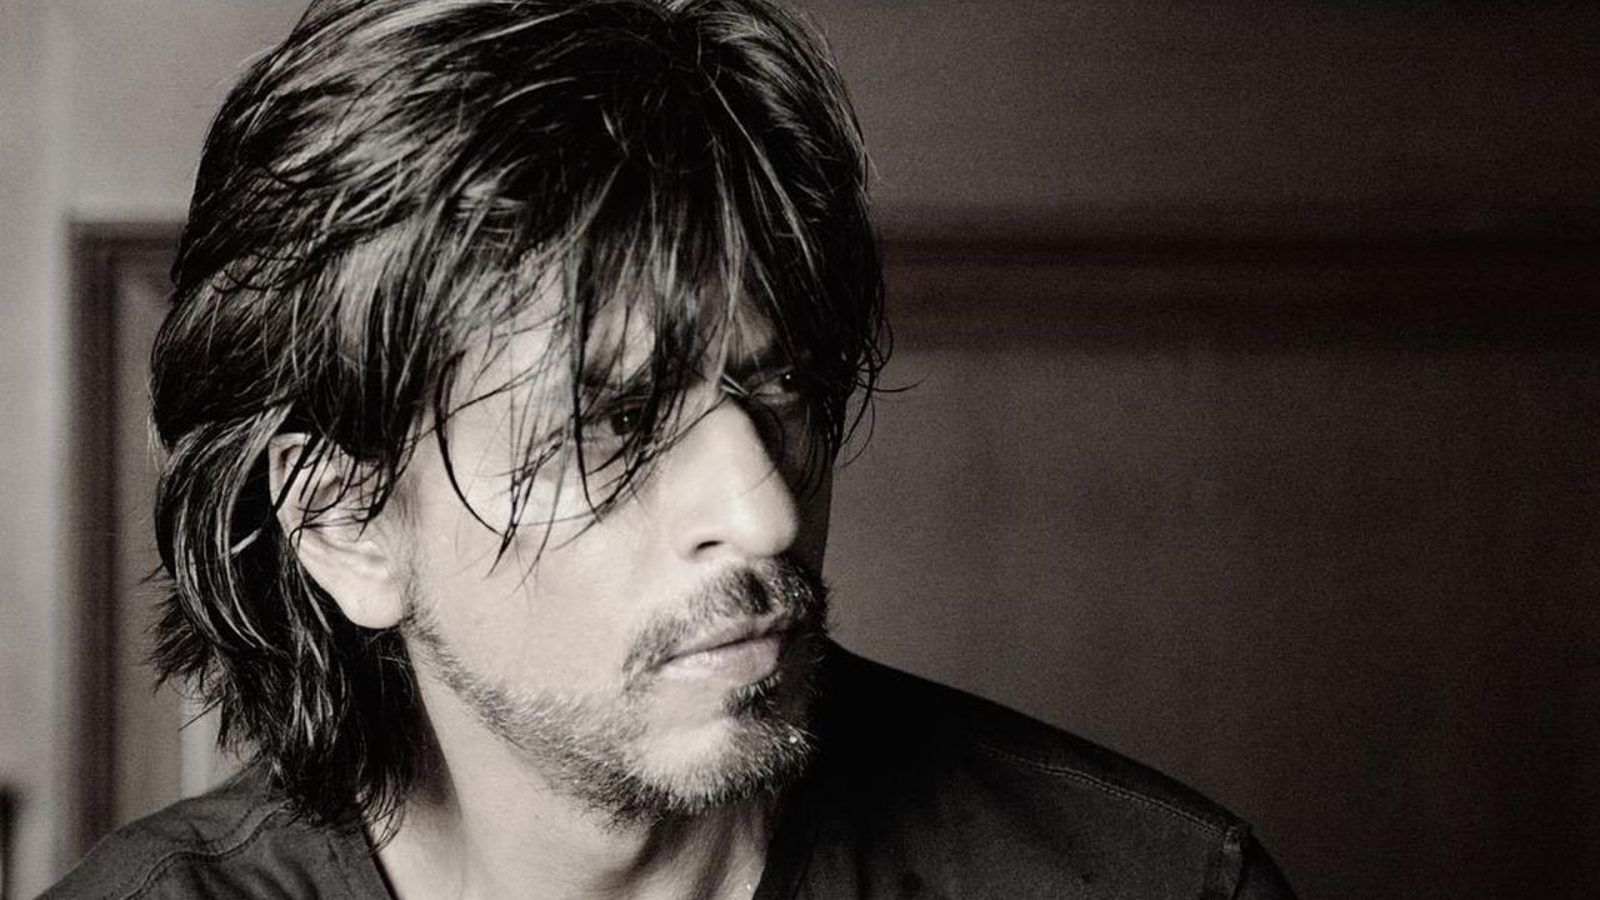 How does Shah Rukh Khan balance his successful acting career with